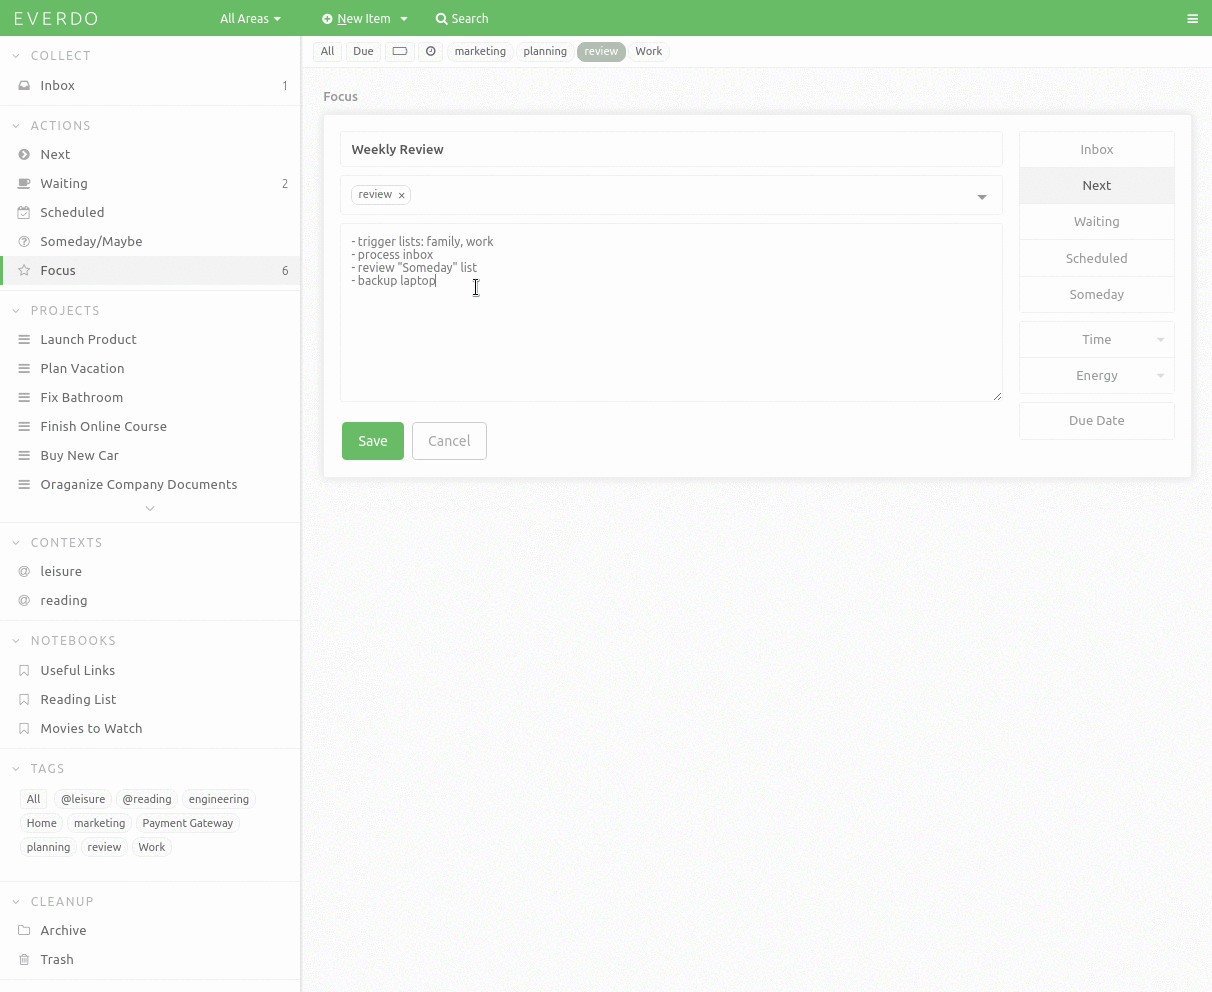 Any tasks or project can have multiple checklists in its text description